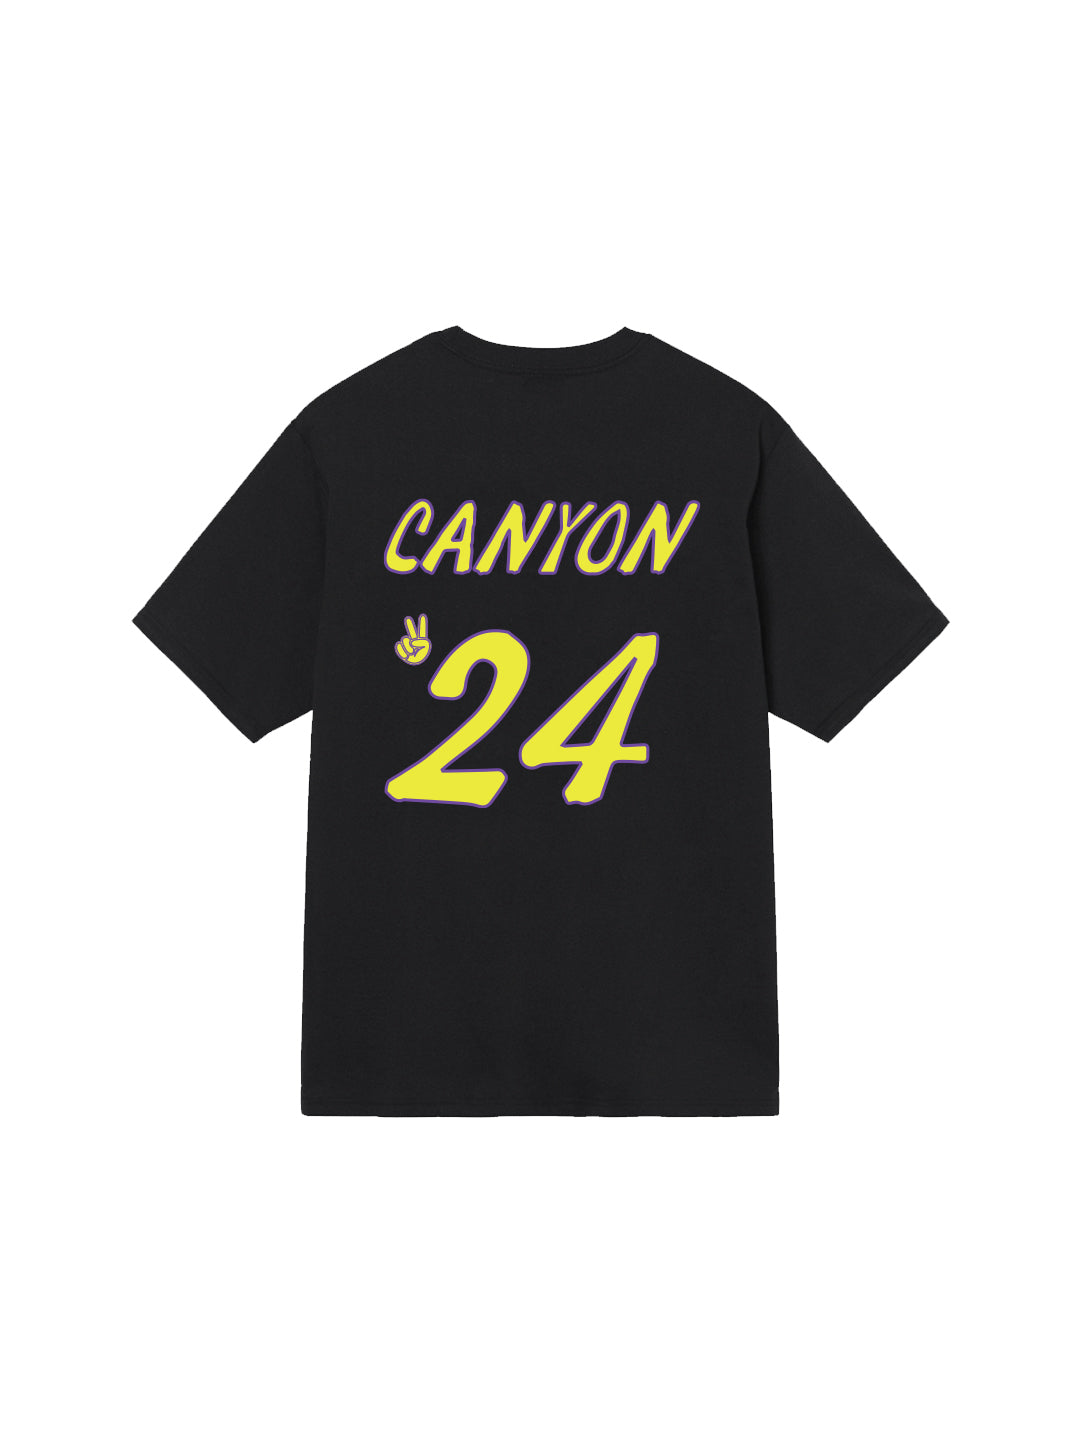 Canyon '24 Adult Tee in Charcoal